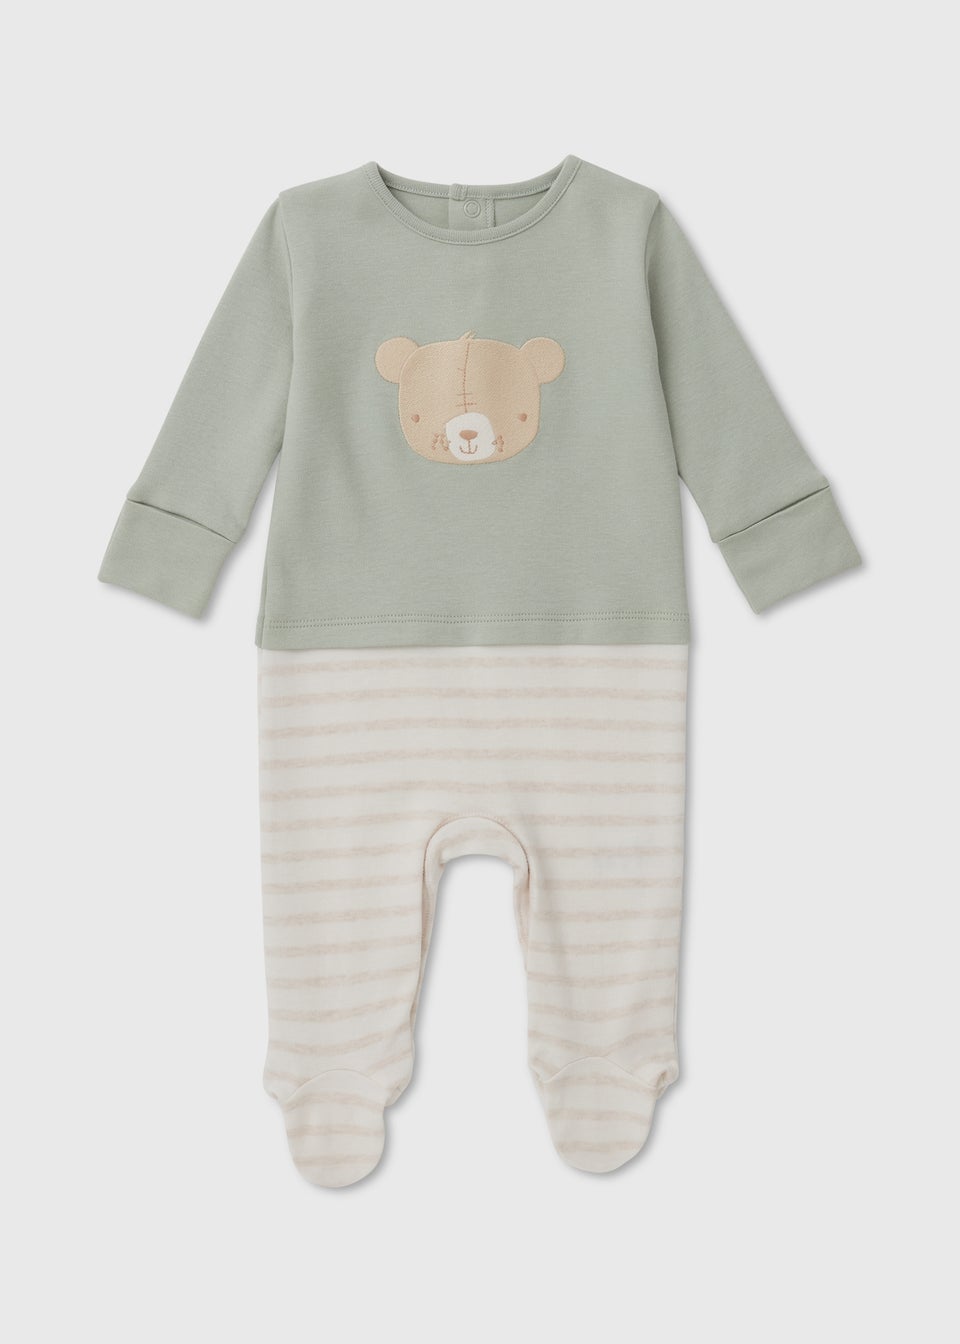 Baby Sage Bear Outfit Sleepsuit (Tiny Baby-12mths)